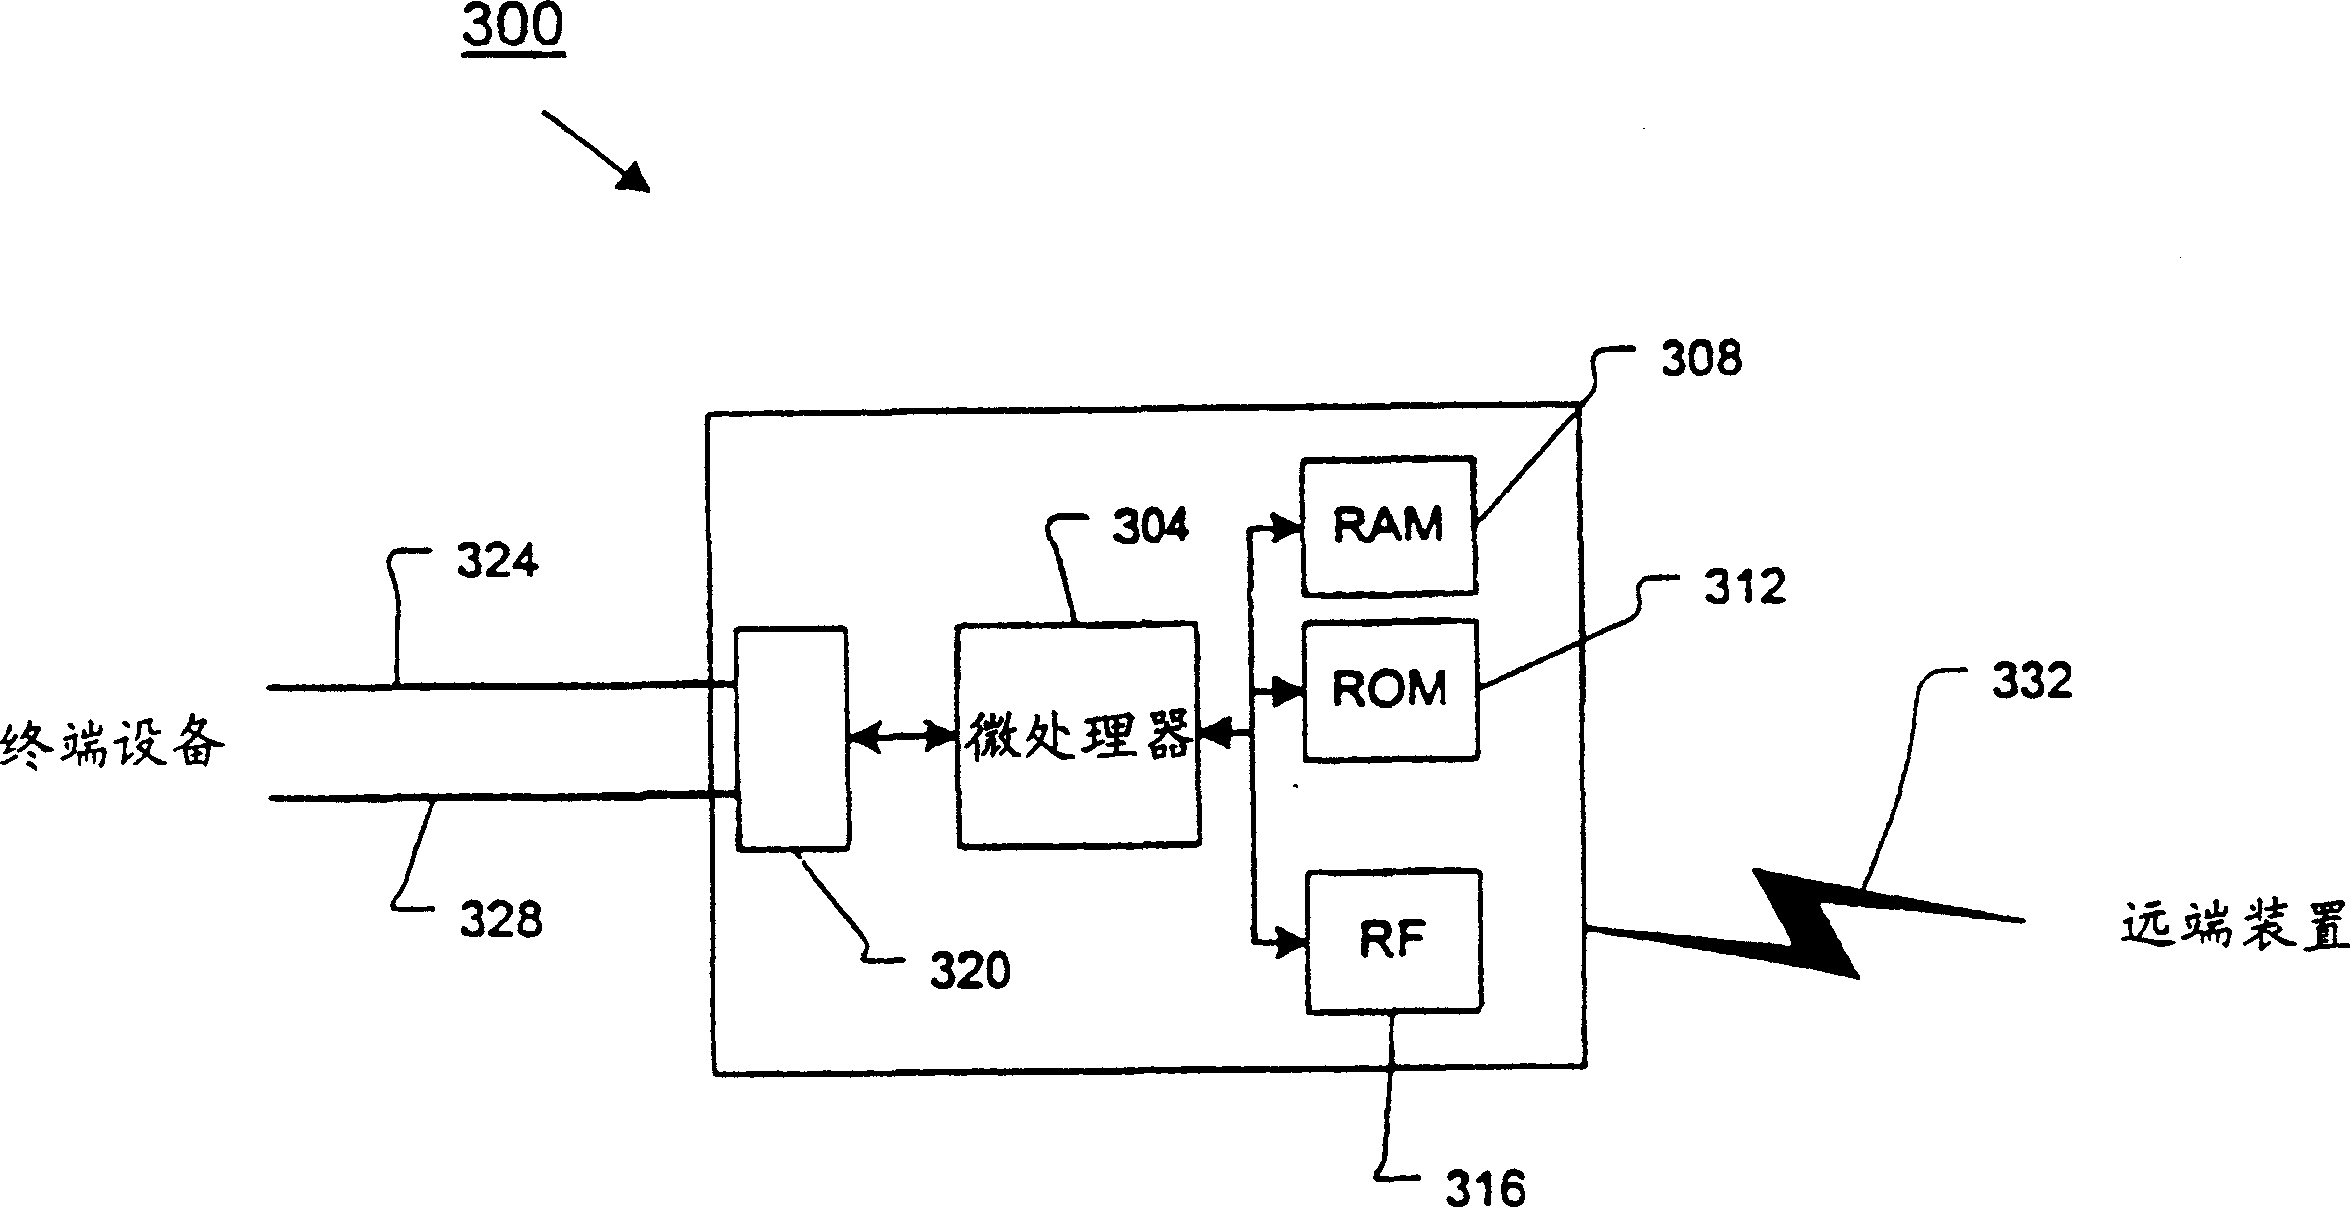 Dual port wireless modem for circuit switched and packet switched data transfer